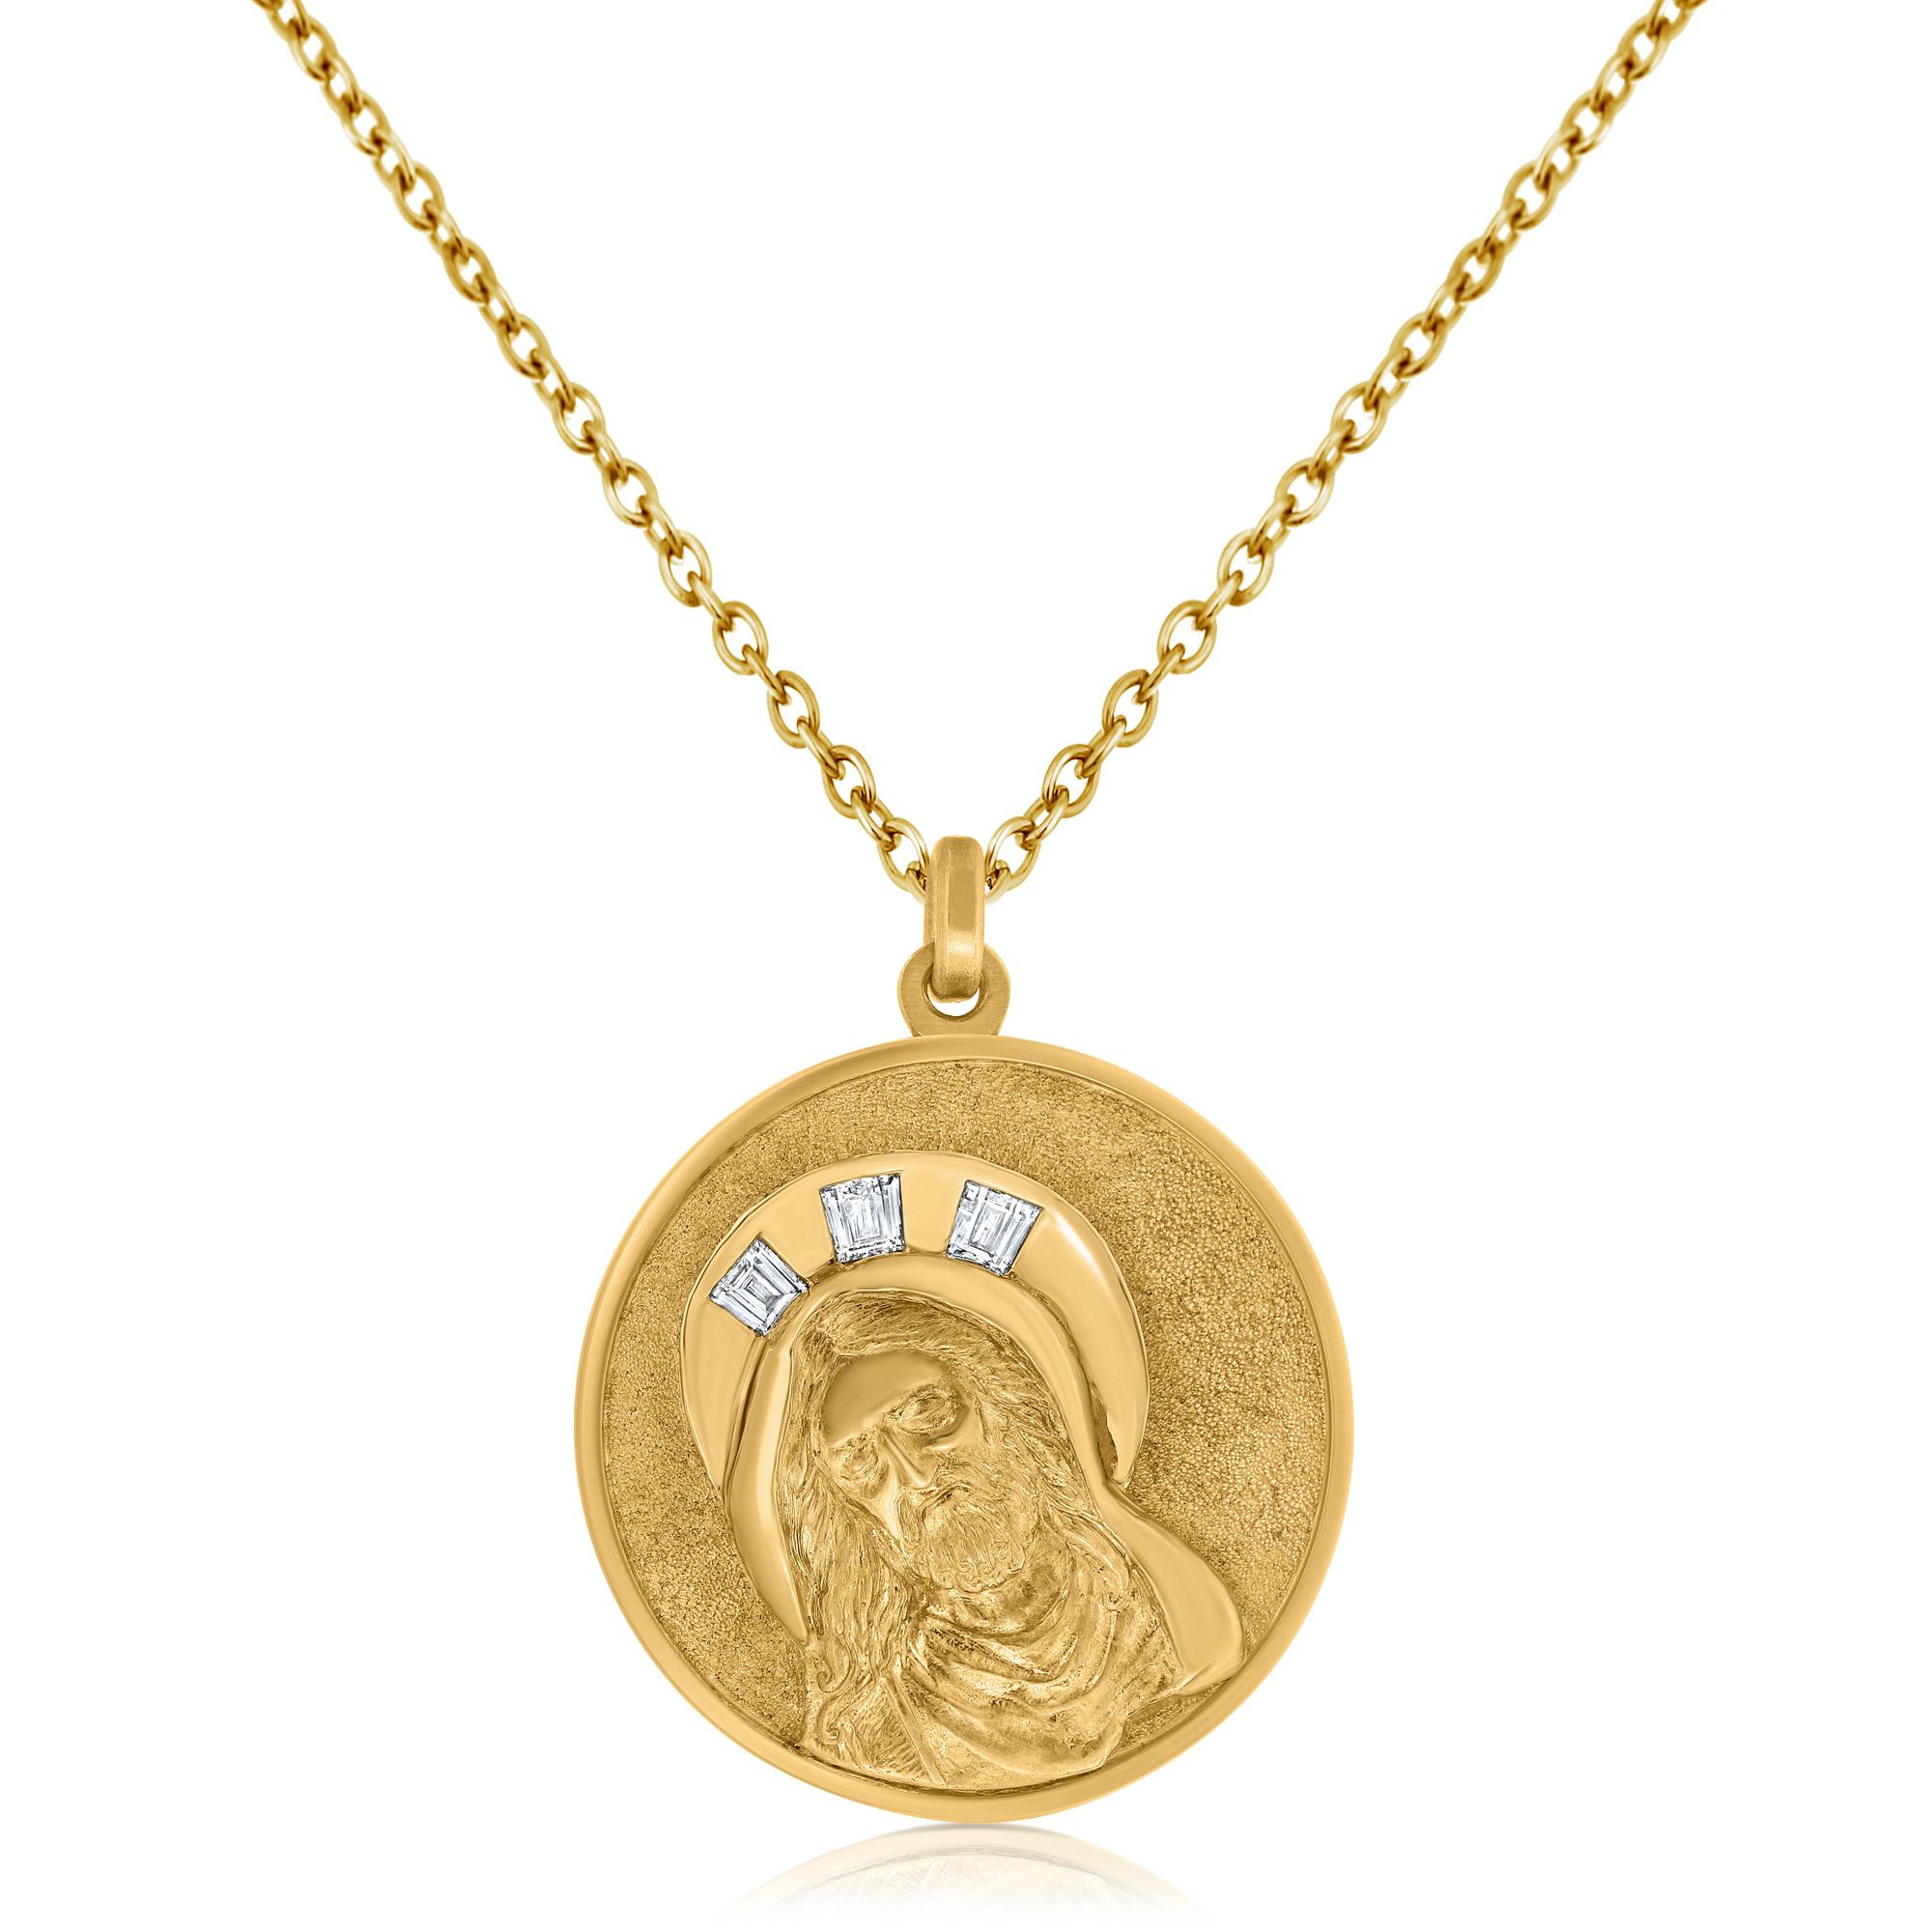 Hand Carved 18K Yellow Gold Jesus Medallion Custom Made for the Pope of Vatican

Hand carved from a drawing and made to order for a government official, this one of a kind 18k yellow gold Jesus medallion was set to be gifted to the pope during his